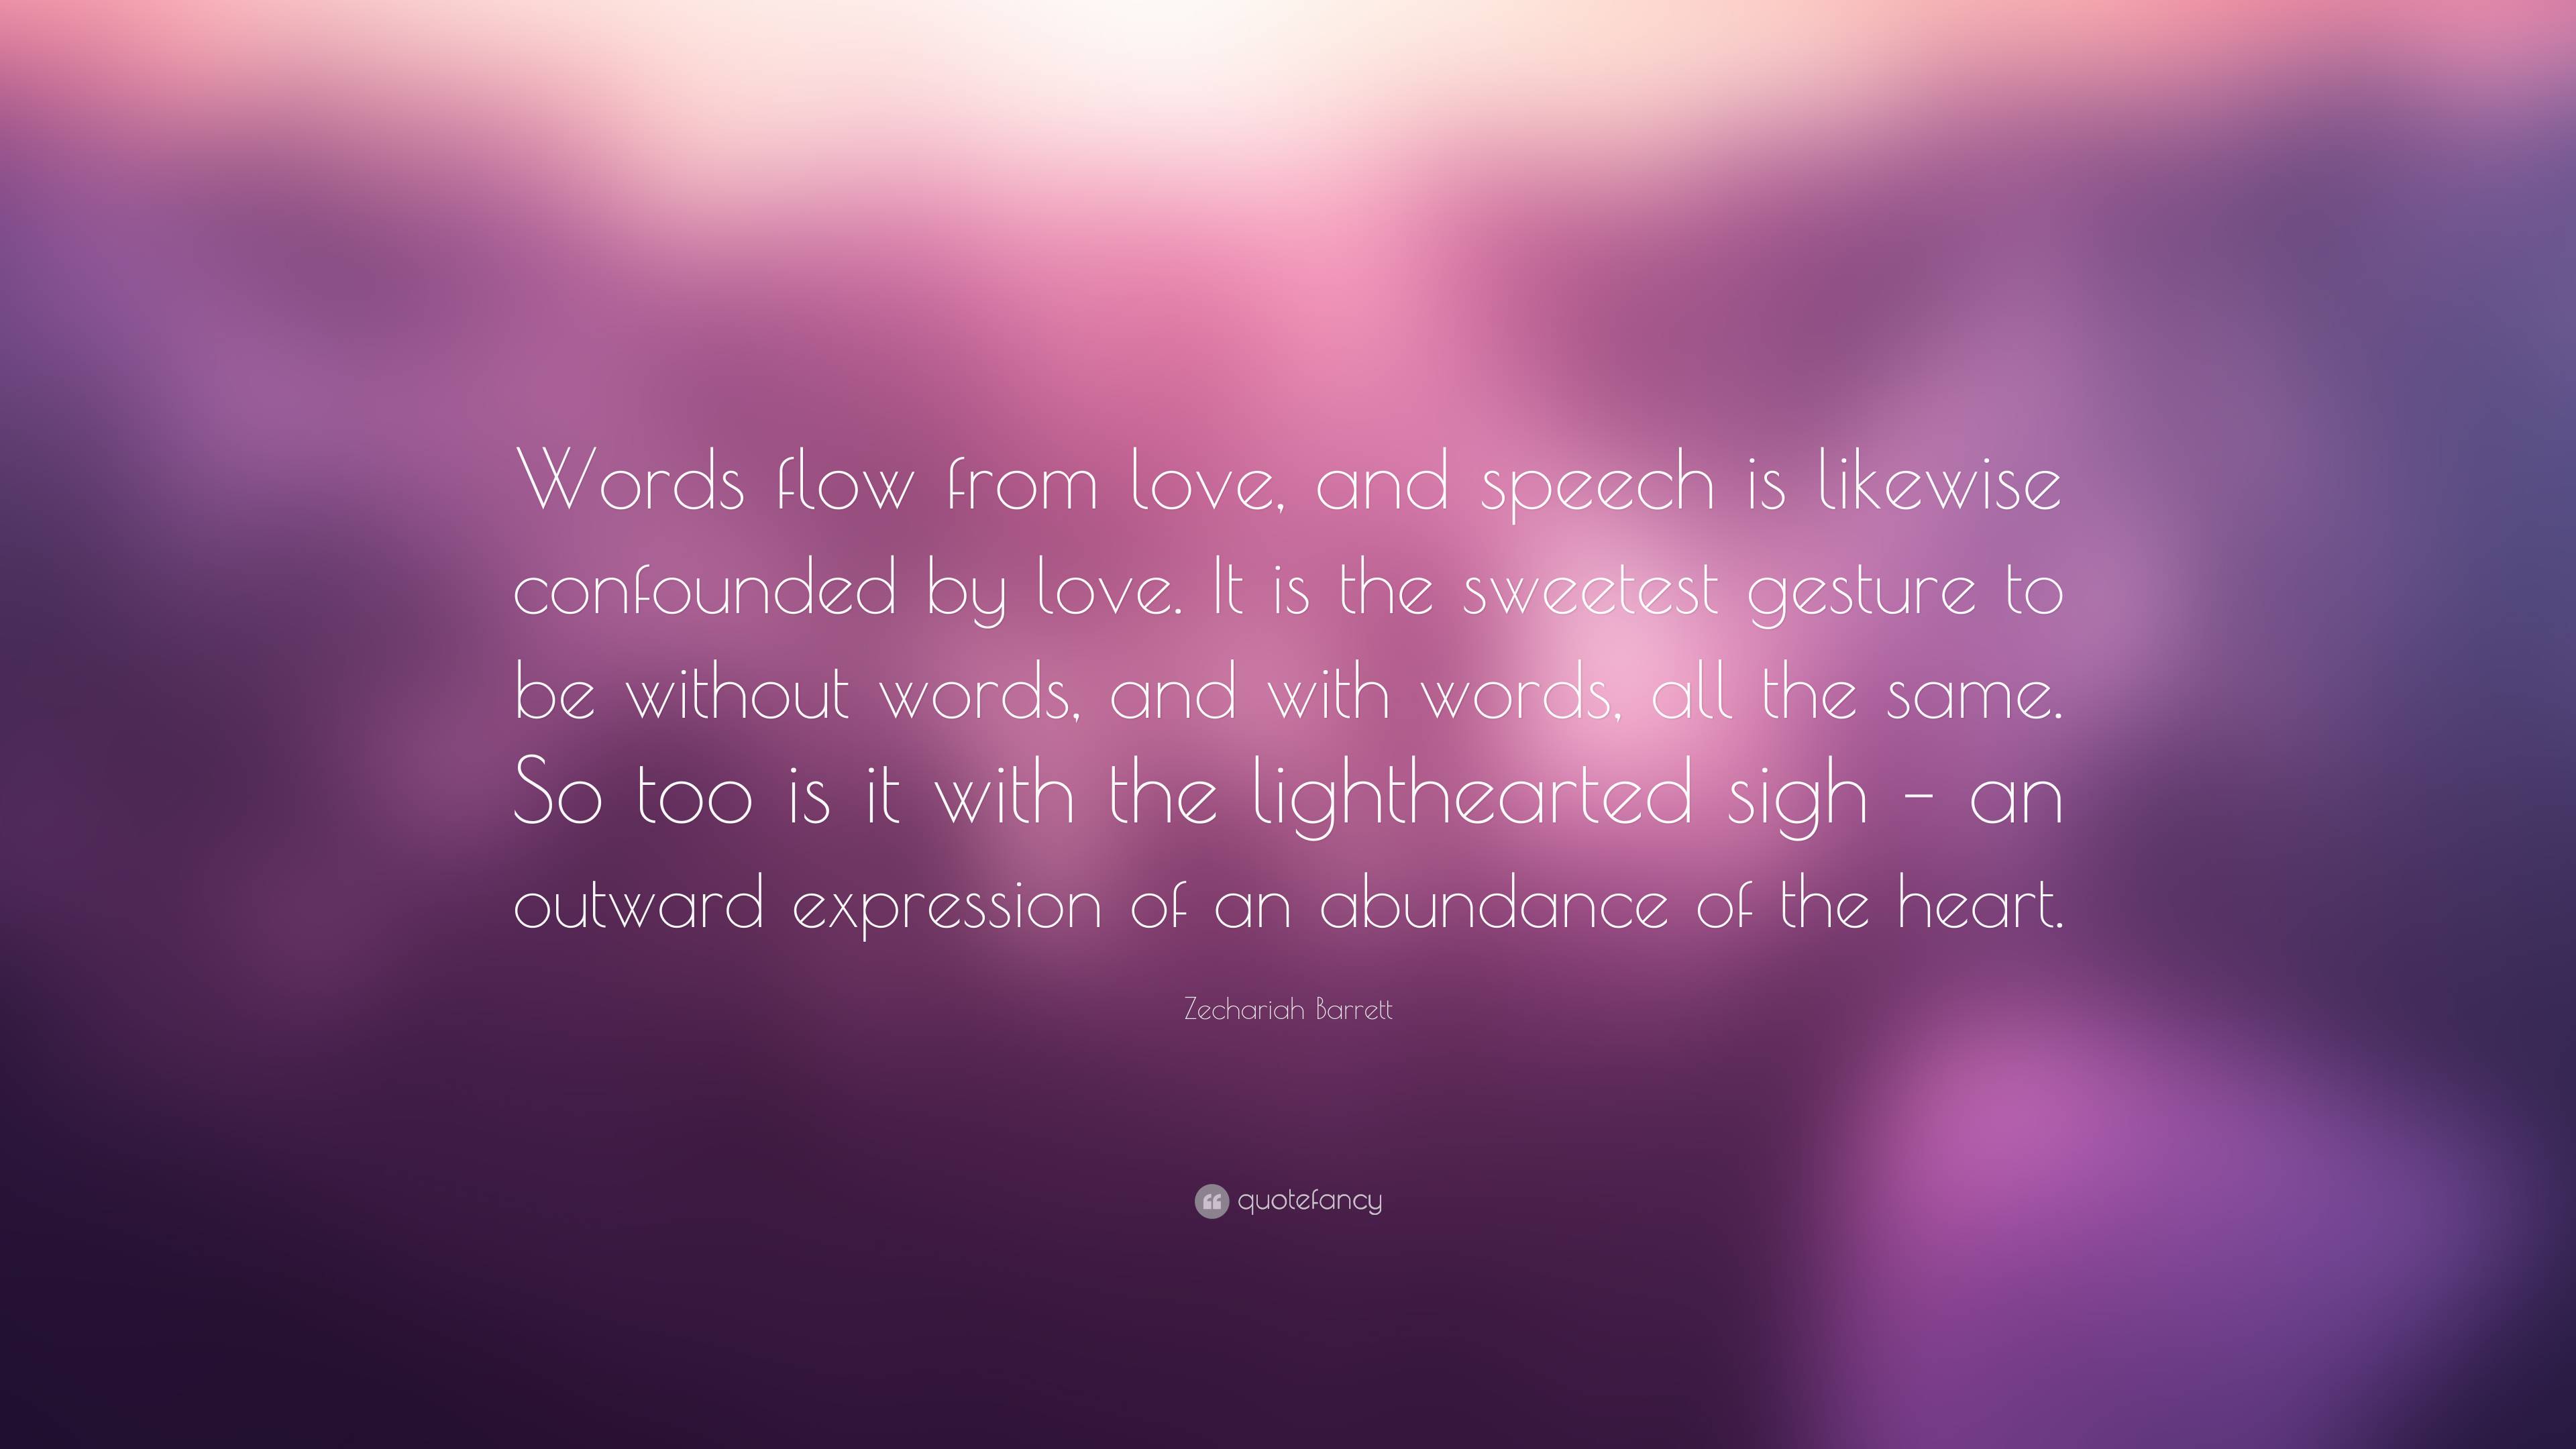 Zechariah Barrett Quote: “Words flow from love, and speech is likewise ...